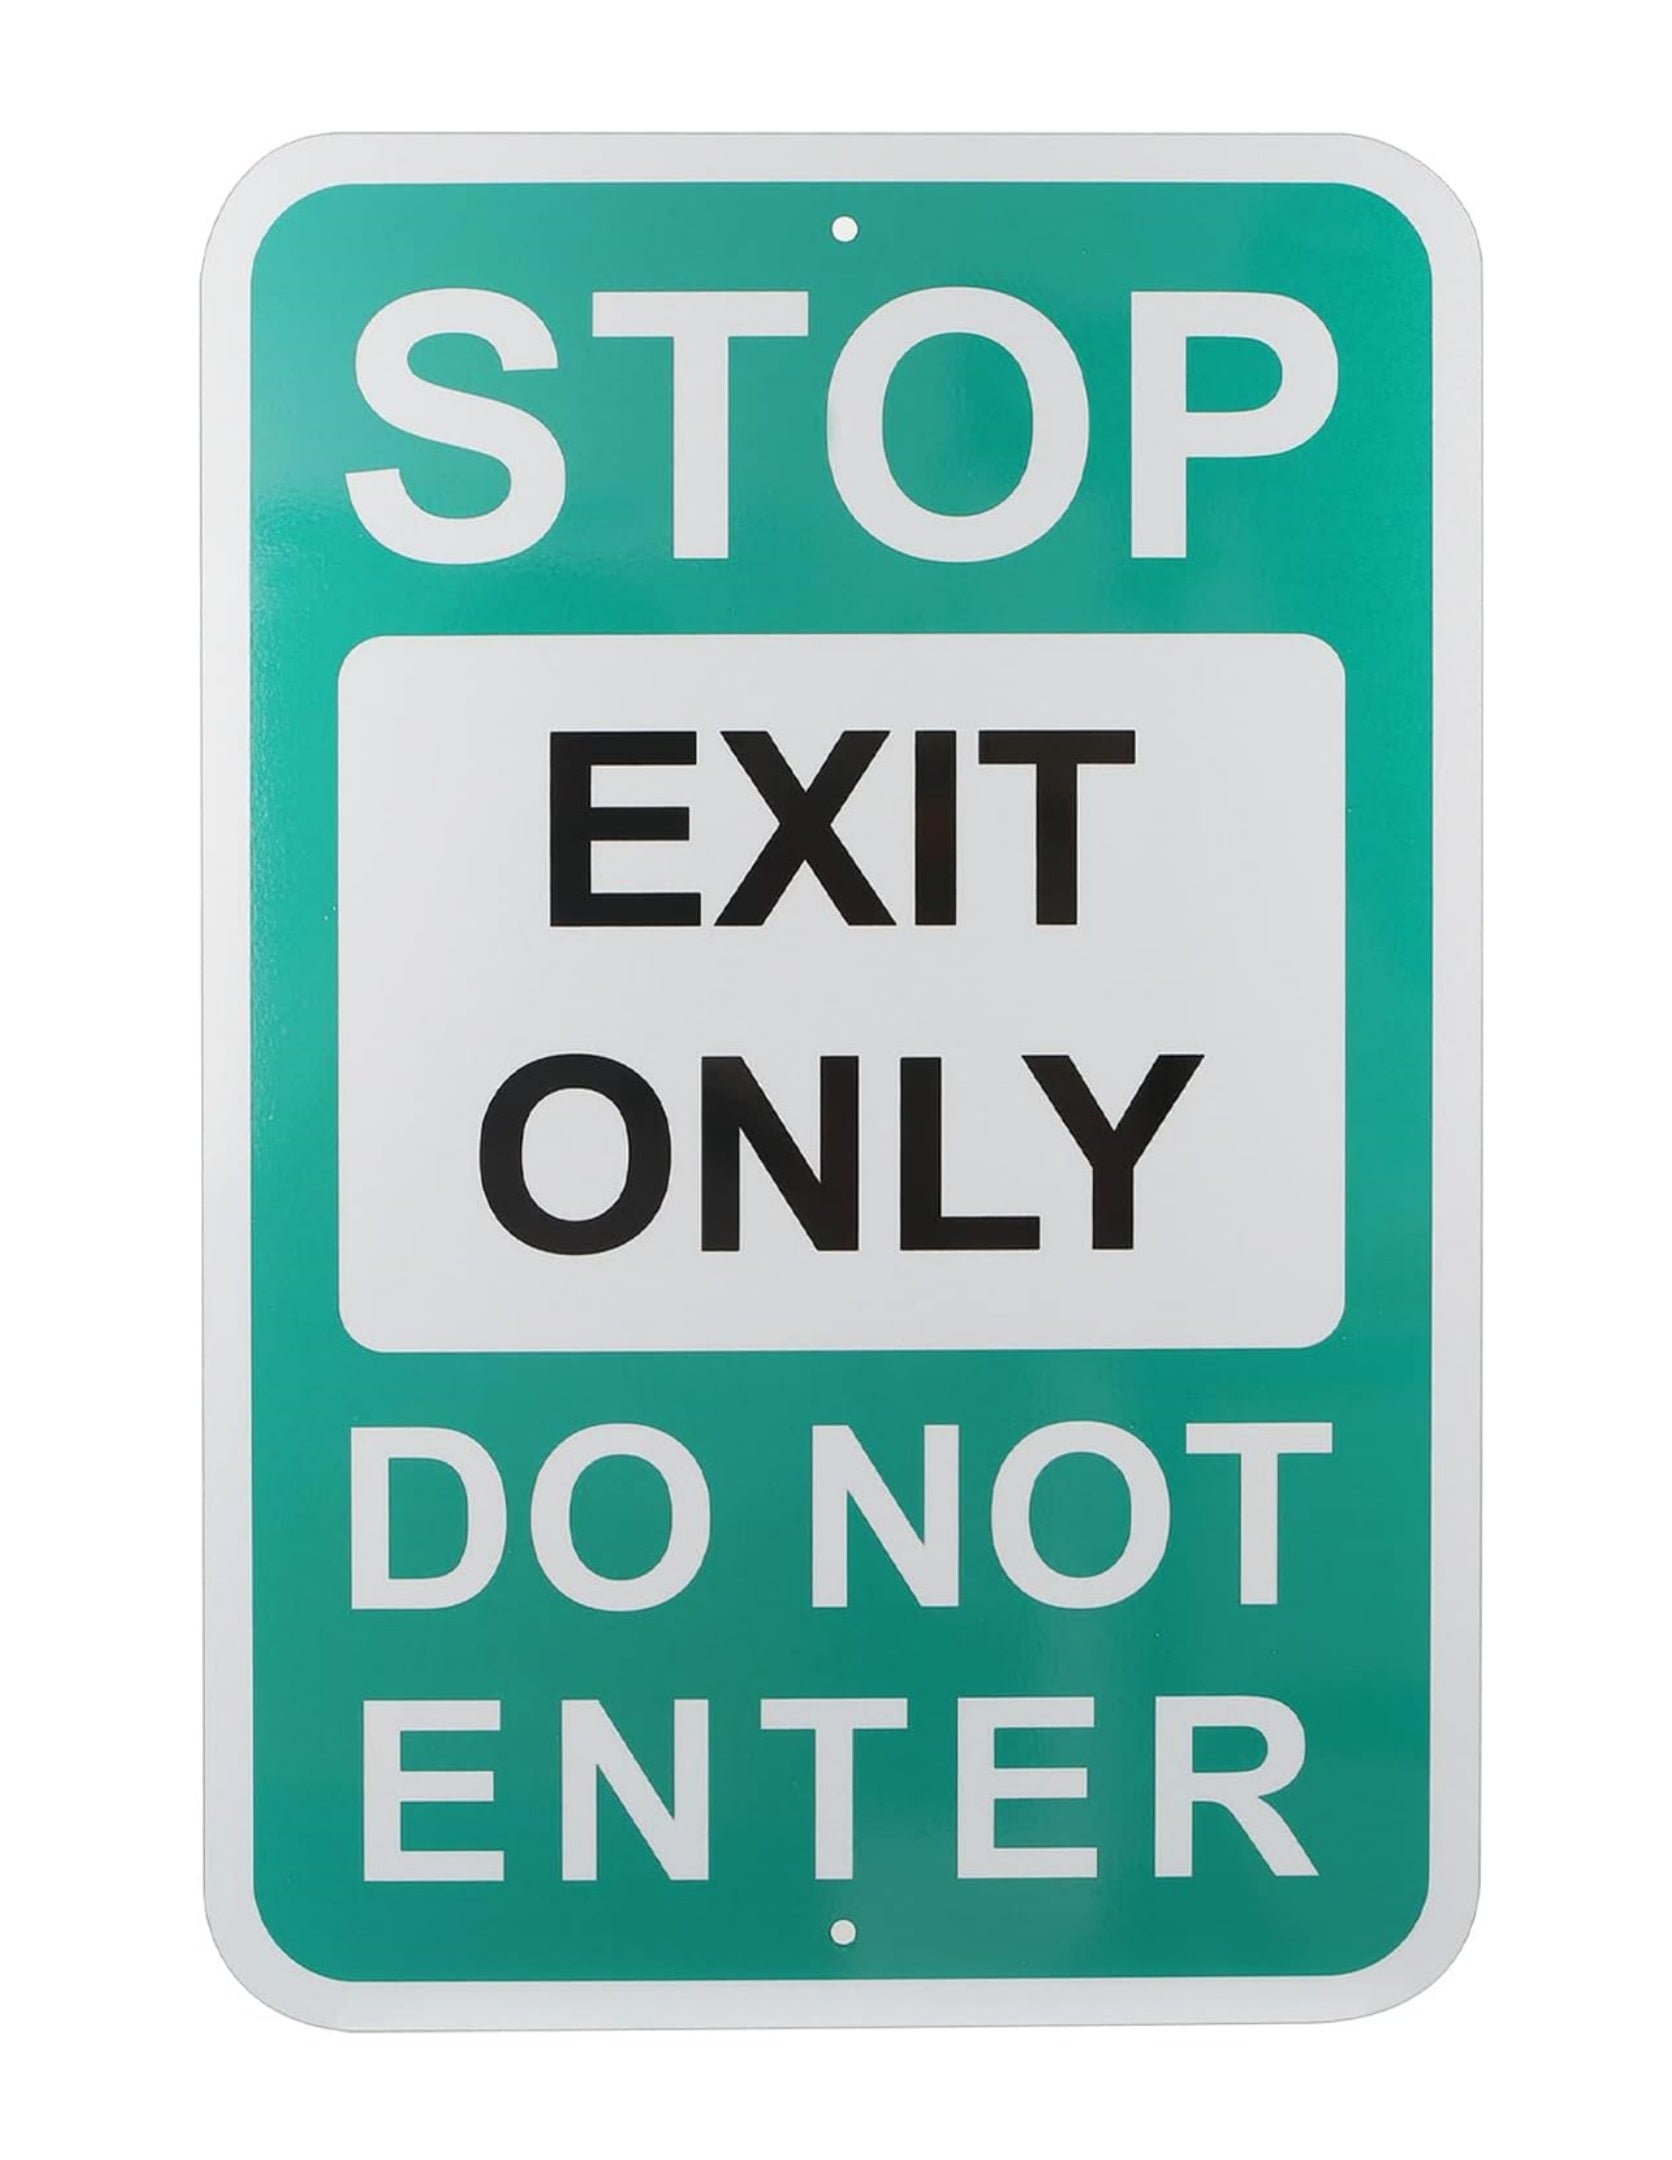 Thten Large Exit Only Do Not Enter Sign, 18"x 12" .04" Aluminum Reflective Sign Rust Free Aluminum-UV Protected and Weatherproof for Driveways Bussiness Garage Yard